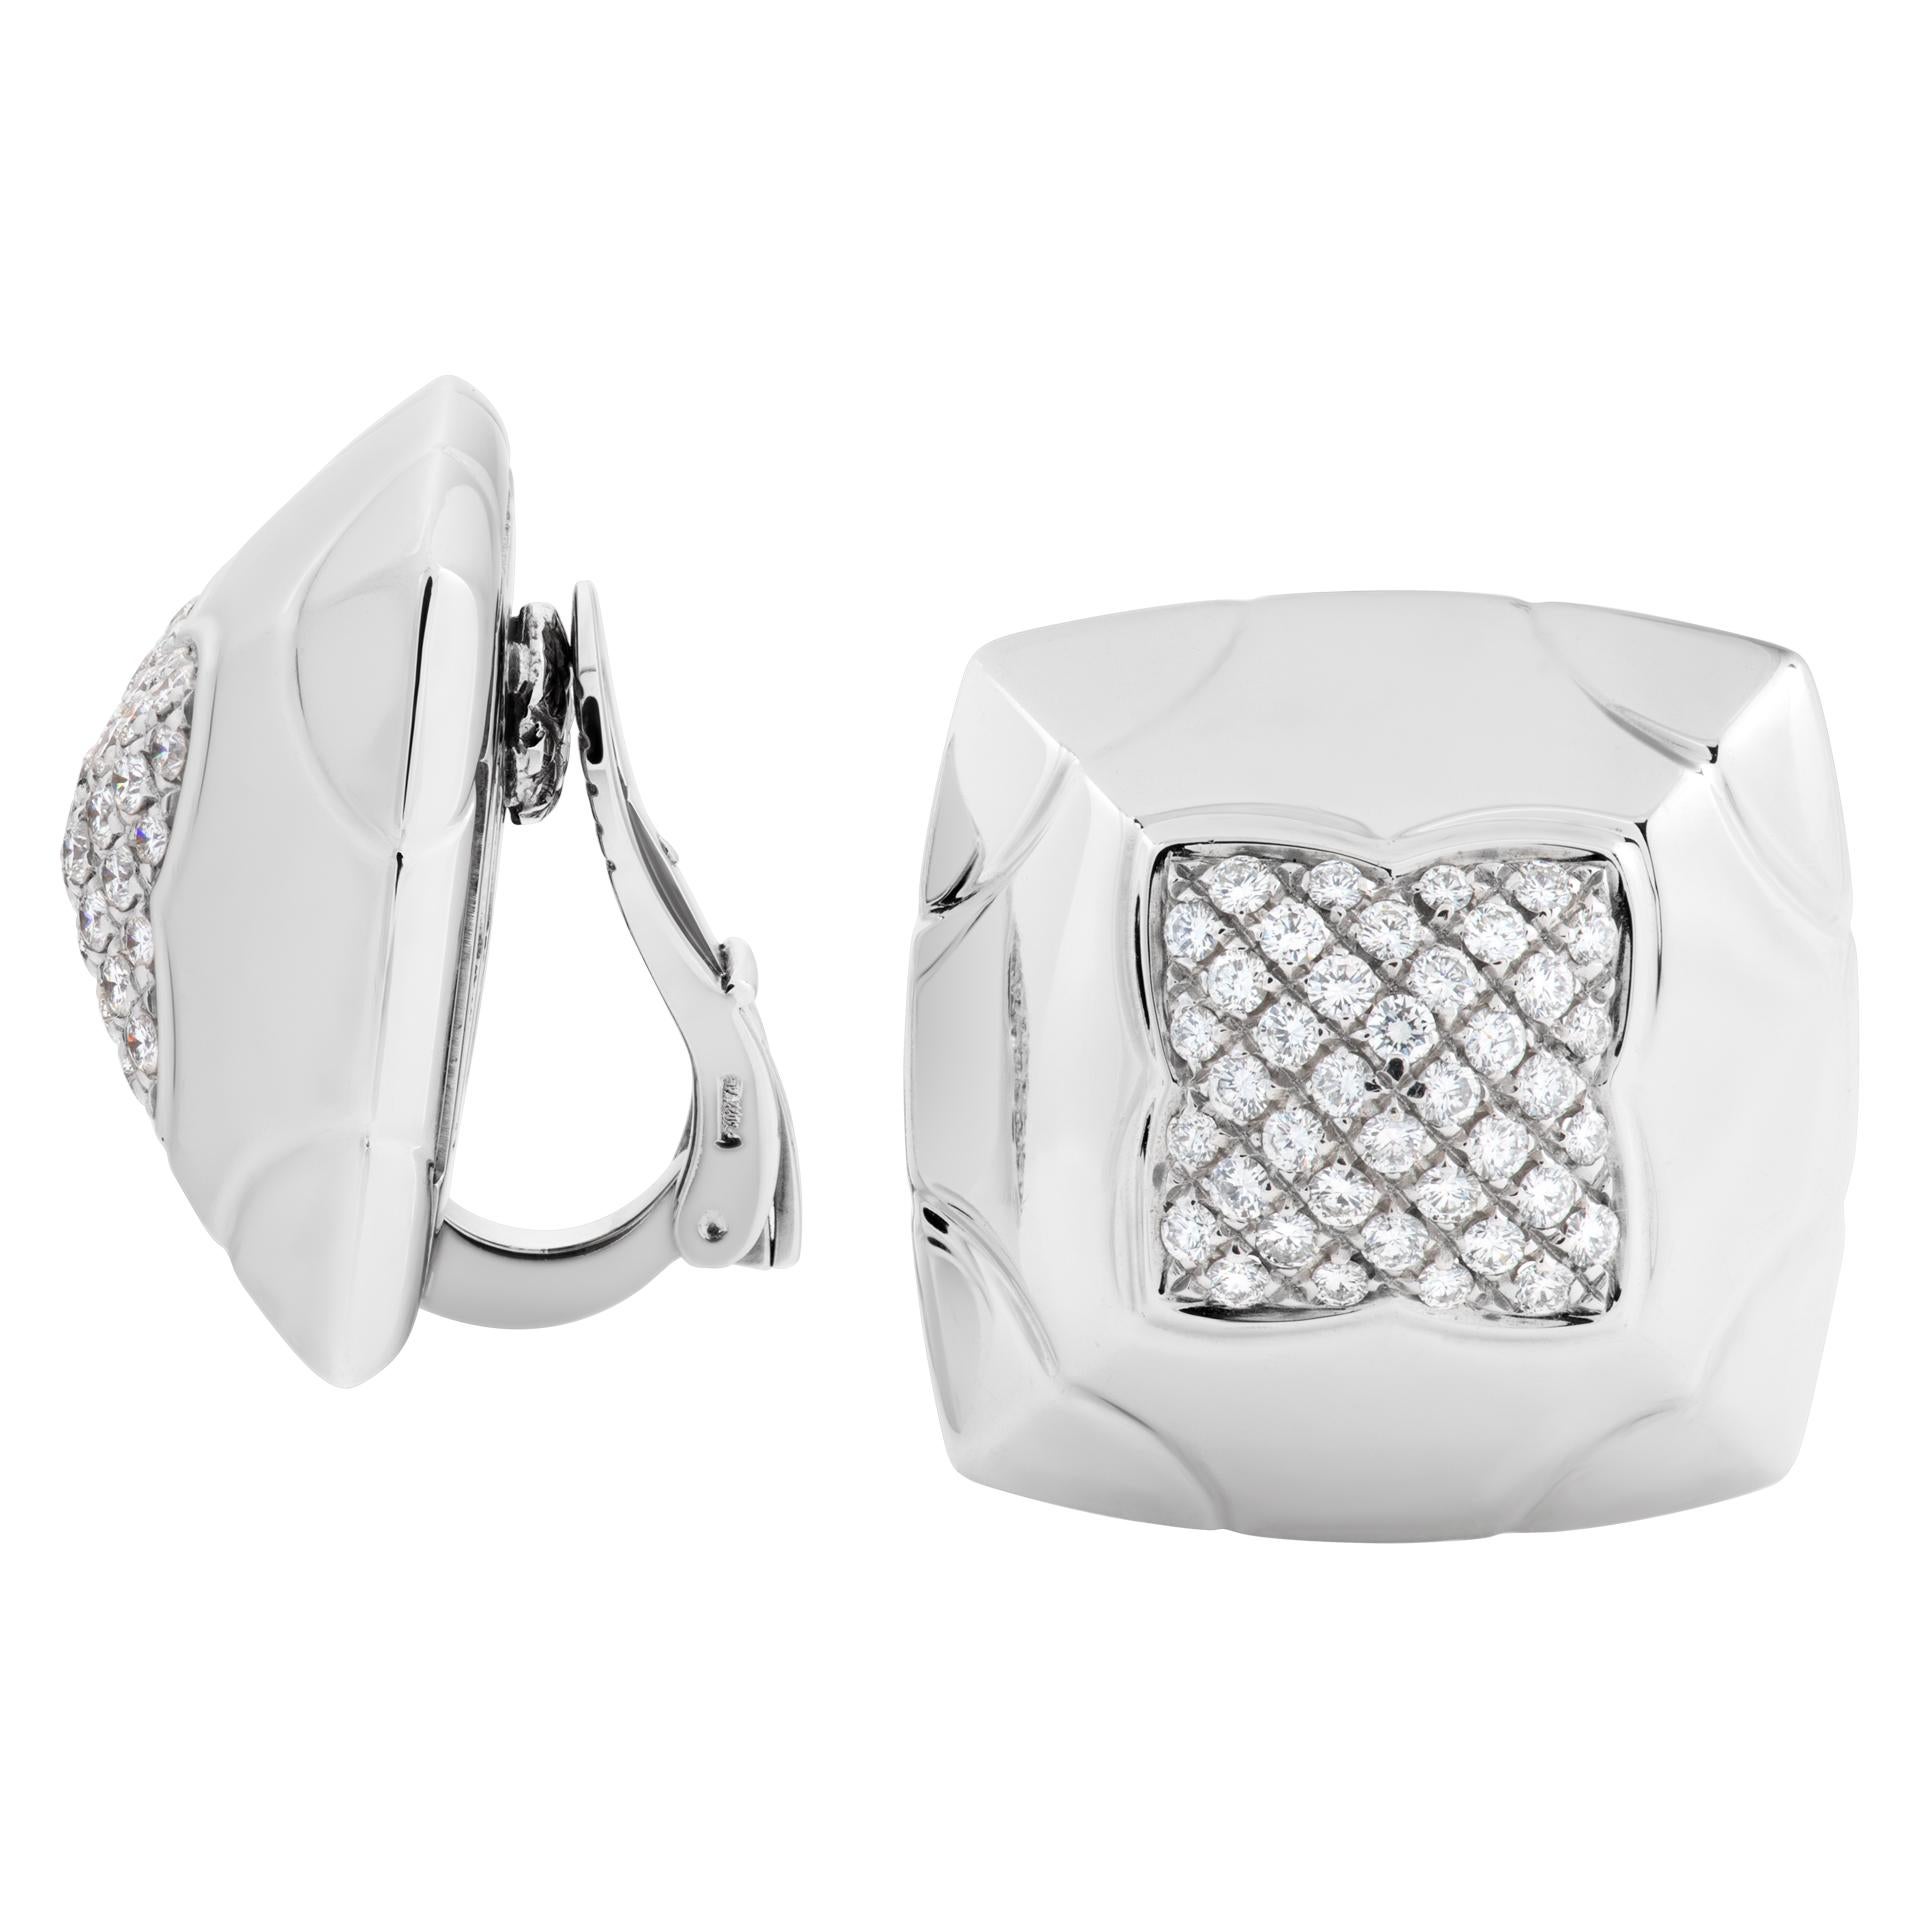 Large Bvlgari Piramide earrings in 18k white gold with 1.52 carats in pave diamonds. Complete with box. Squares are 1